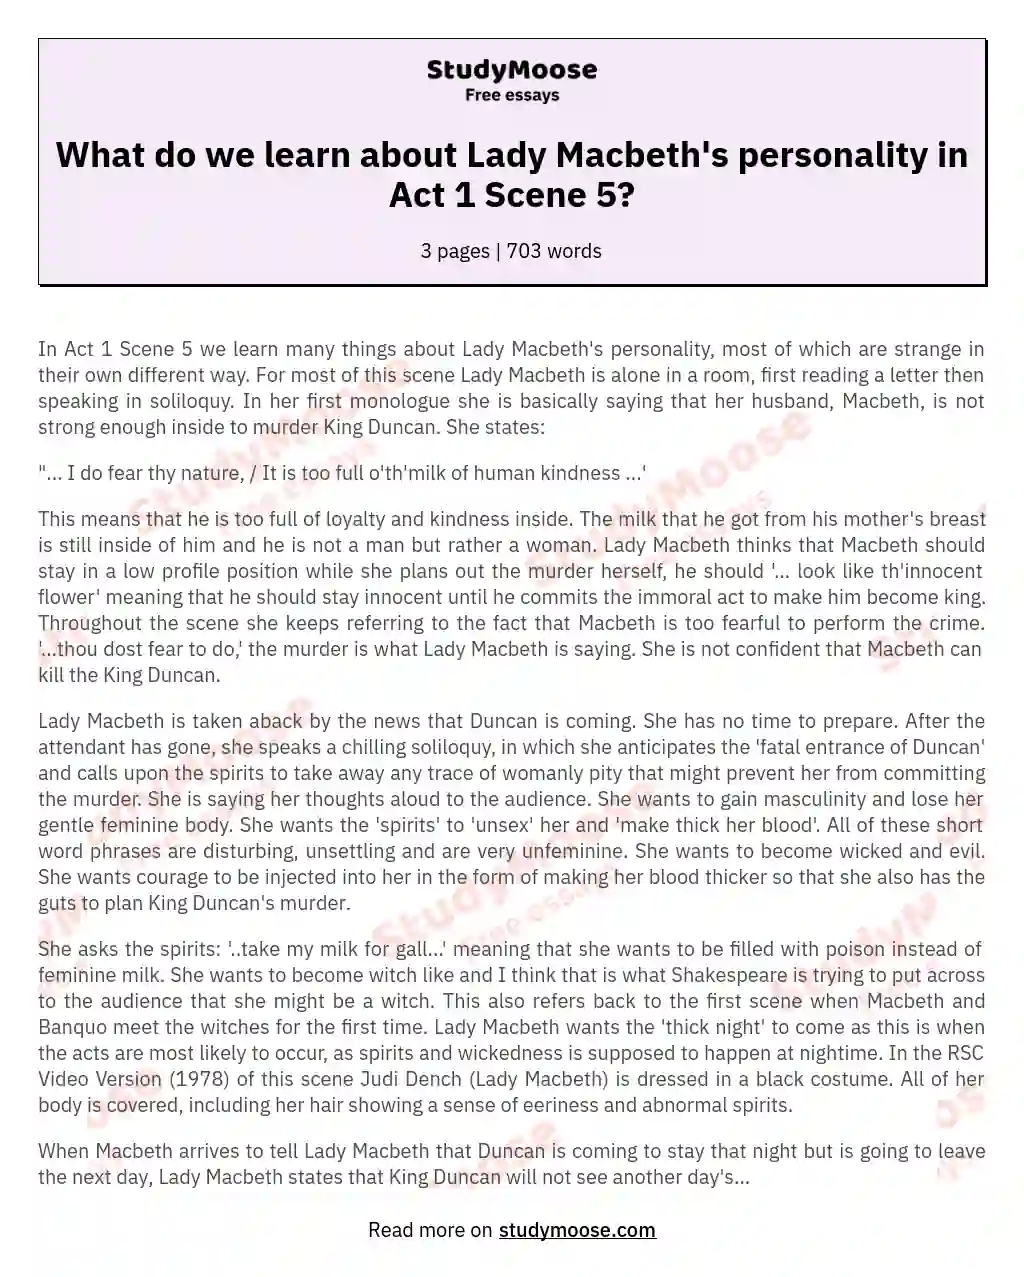 What do we learn about Lady Macbeth's personality in Act 1 Scene 5? essay